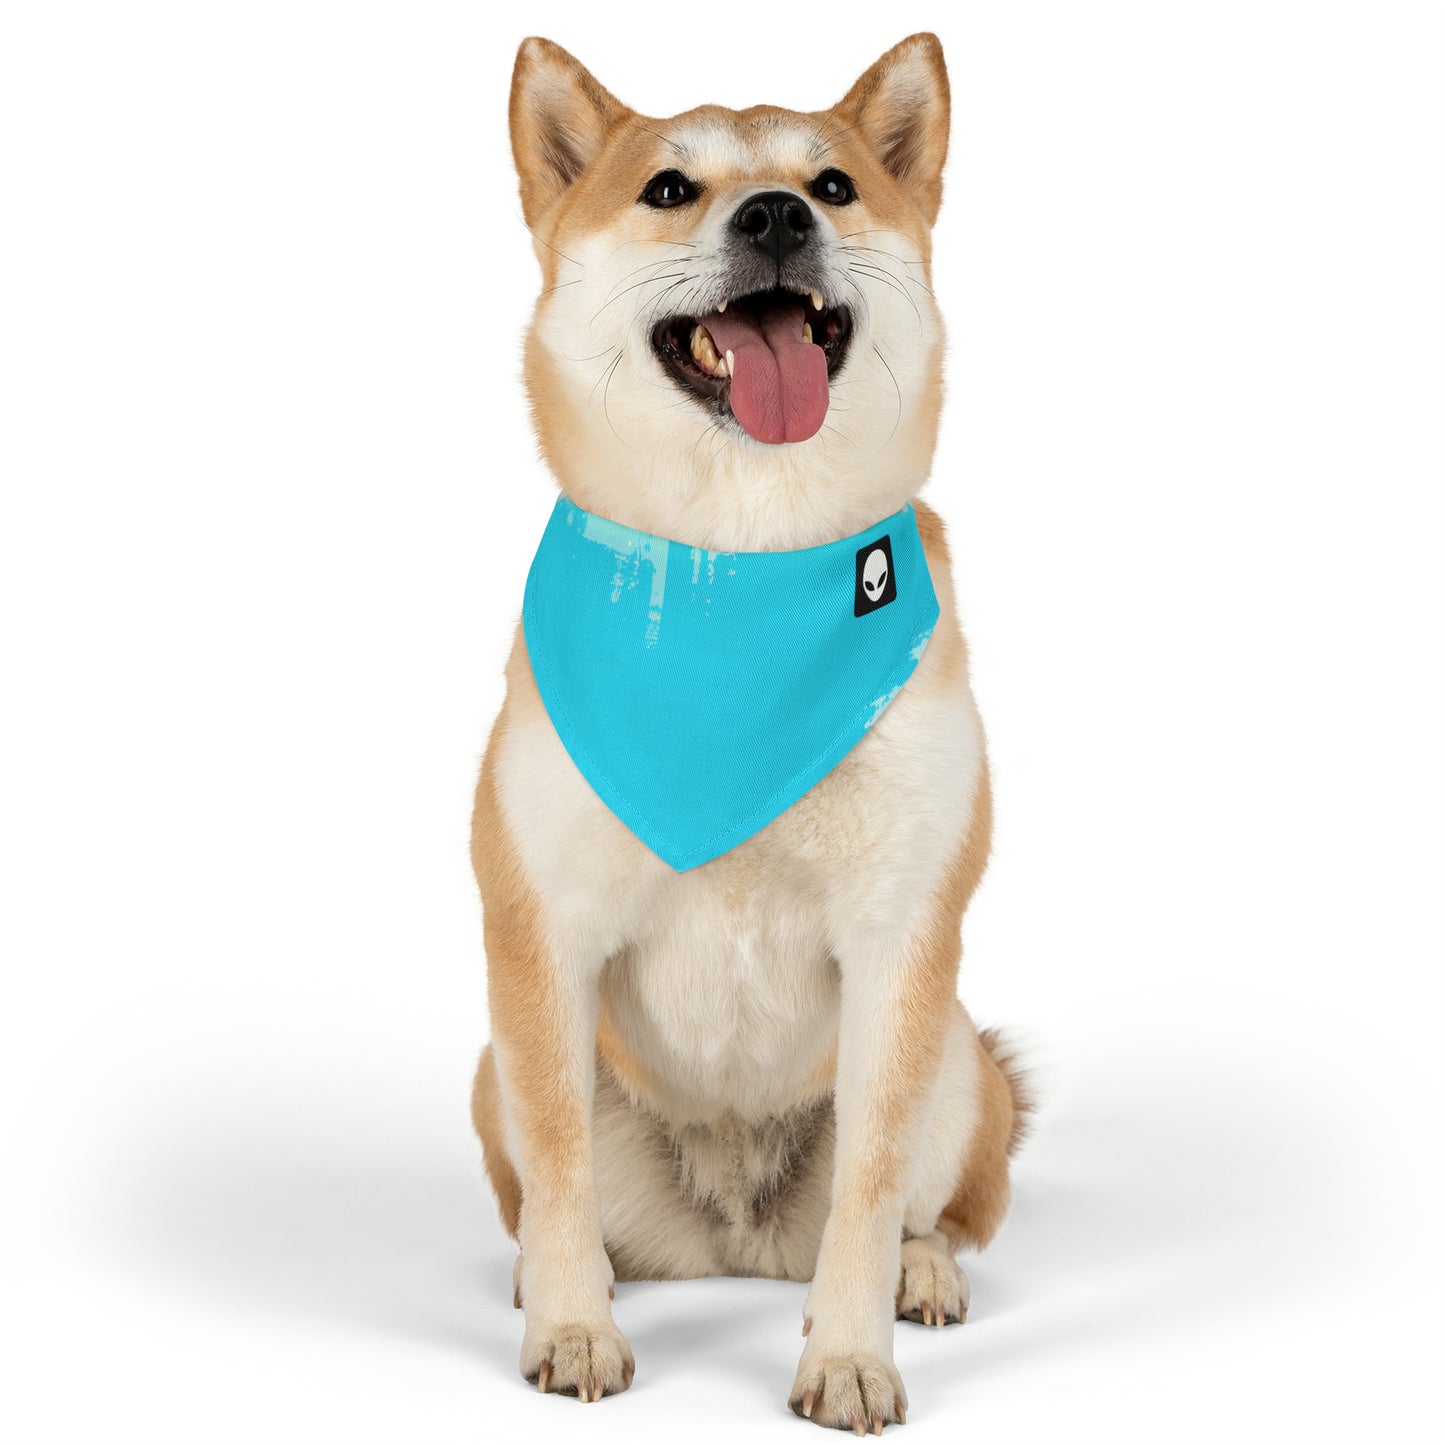 "A Breezy Skyscape: A Combination of Tradition and Modernity" - The Alien Pet Bandana Collar